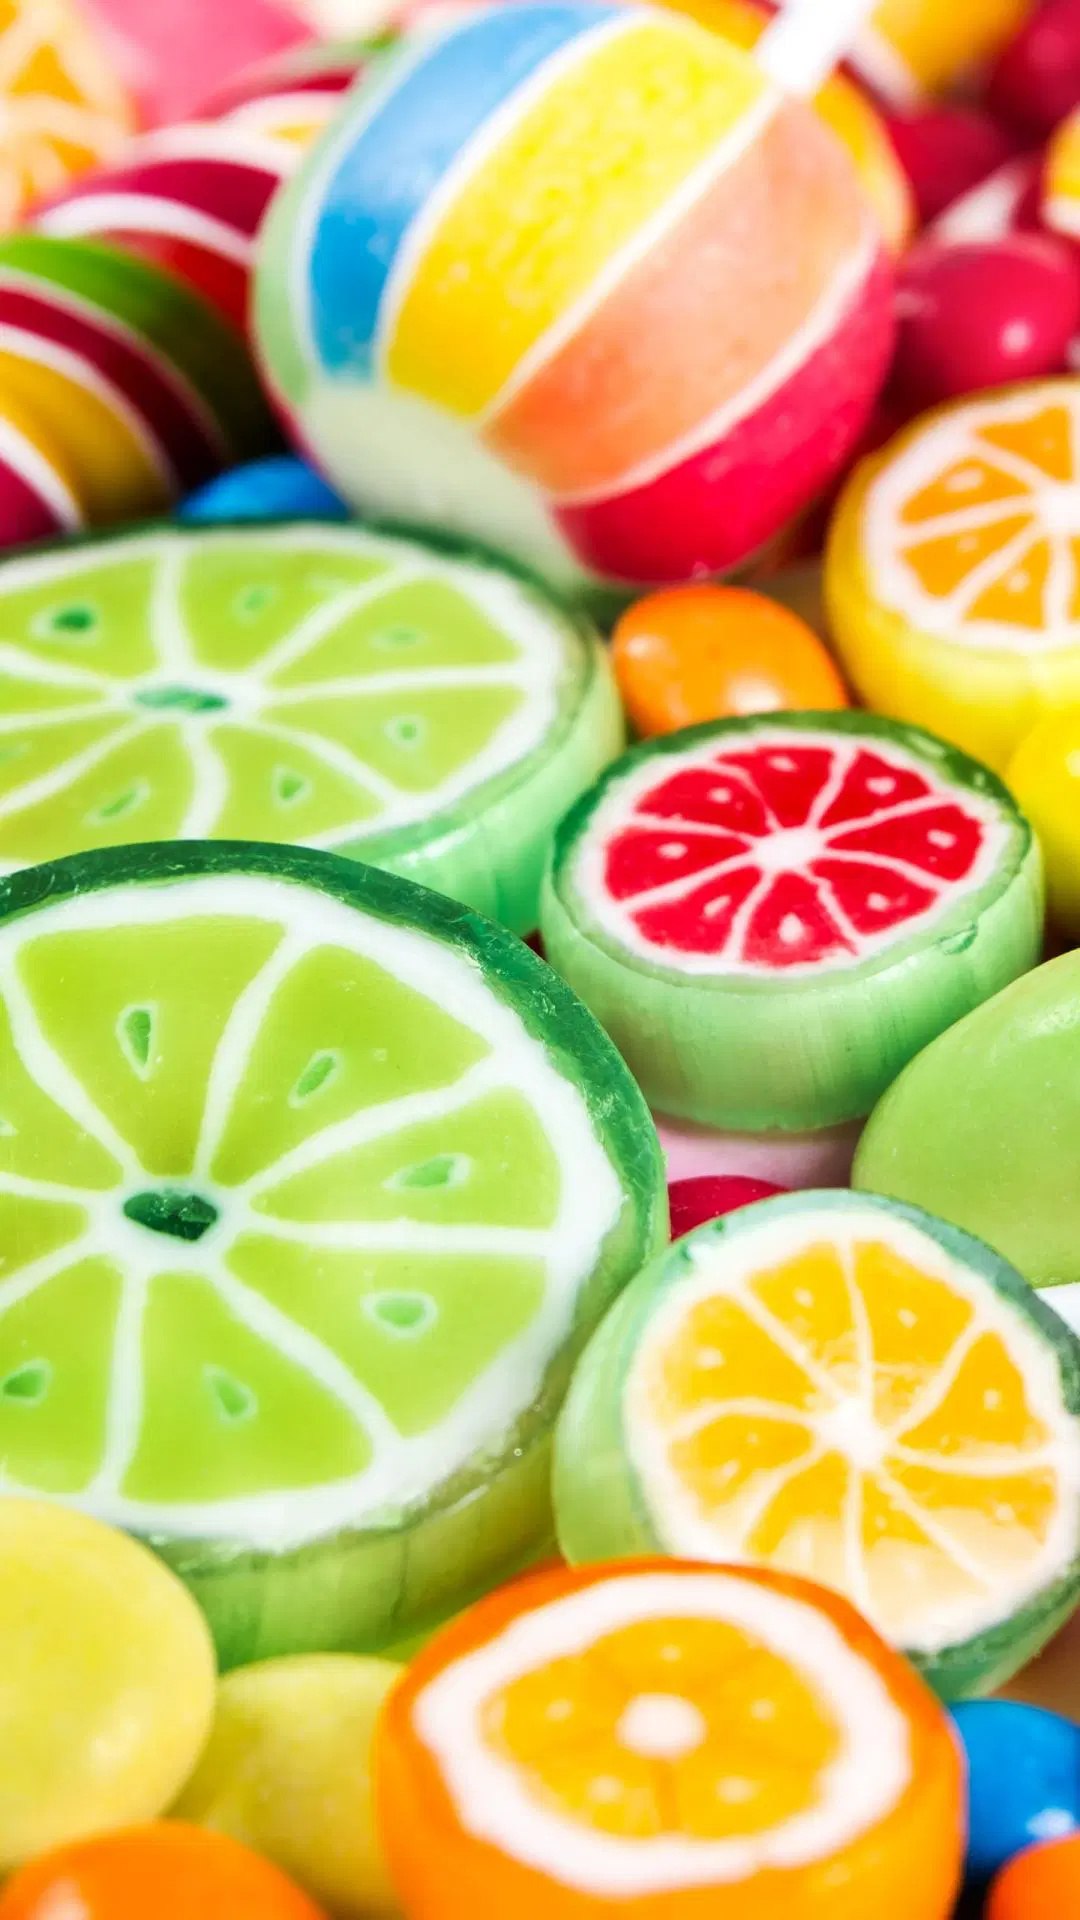 Food candy wallpaper, Vibrant and delicious, High definition delight, Sweet cravings, 1080x1920 Full HD Handy